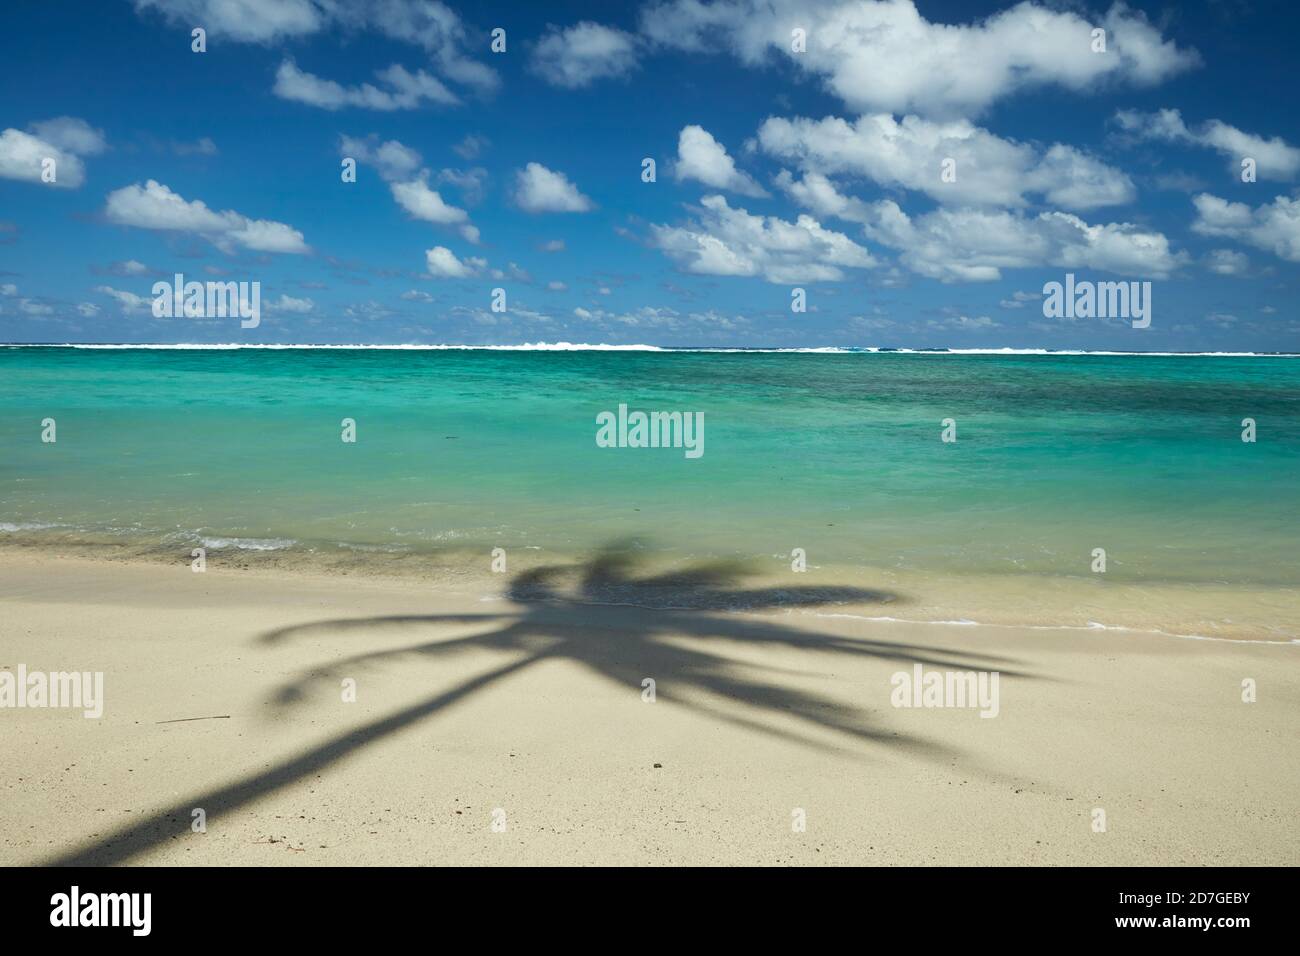 Coconut palm shadow on beach and Pacific Ocean, Rarotonga, Cook Islands, South Pacific Stock Photo